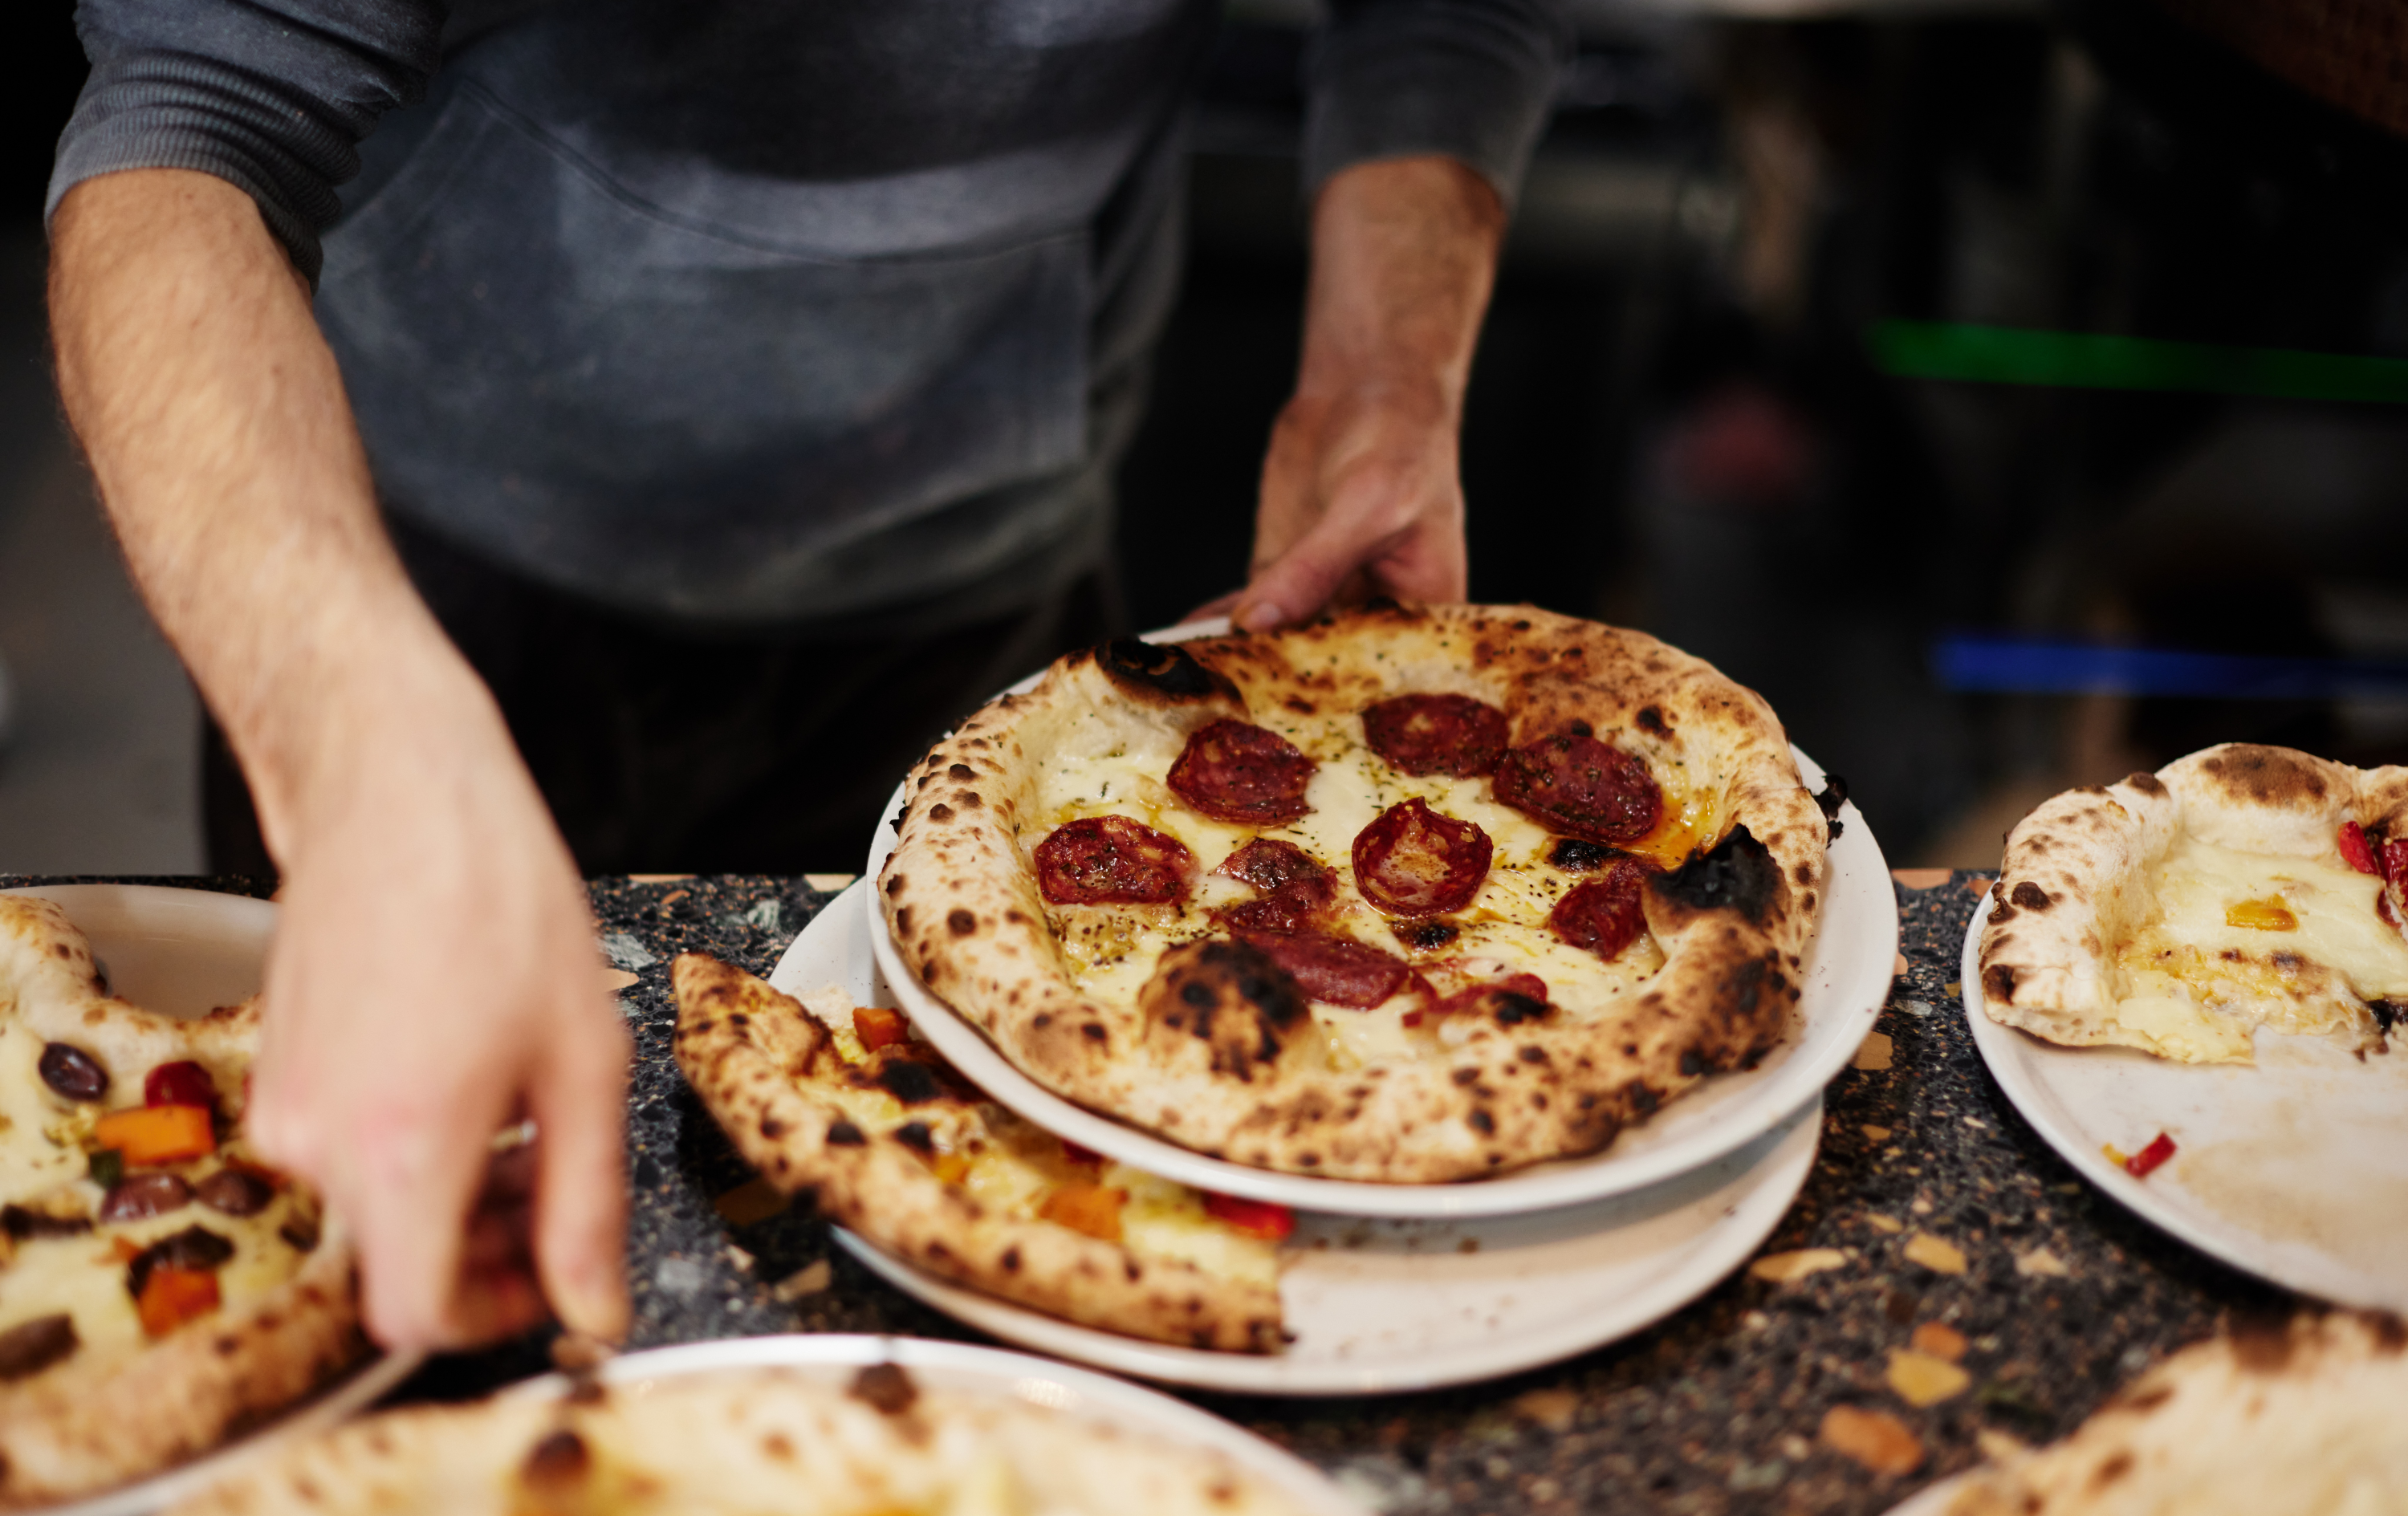 A woodfired Pizza coming out of the oven at one of Melbourne's best pizza restaurants, 400 Gradi.